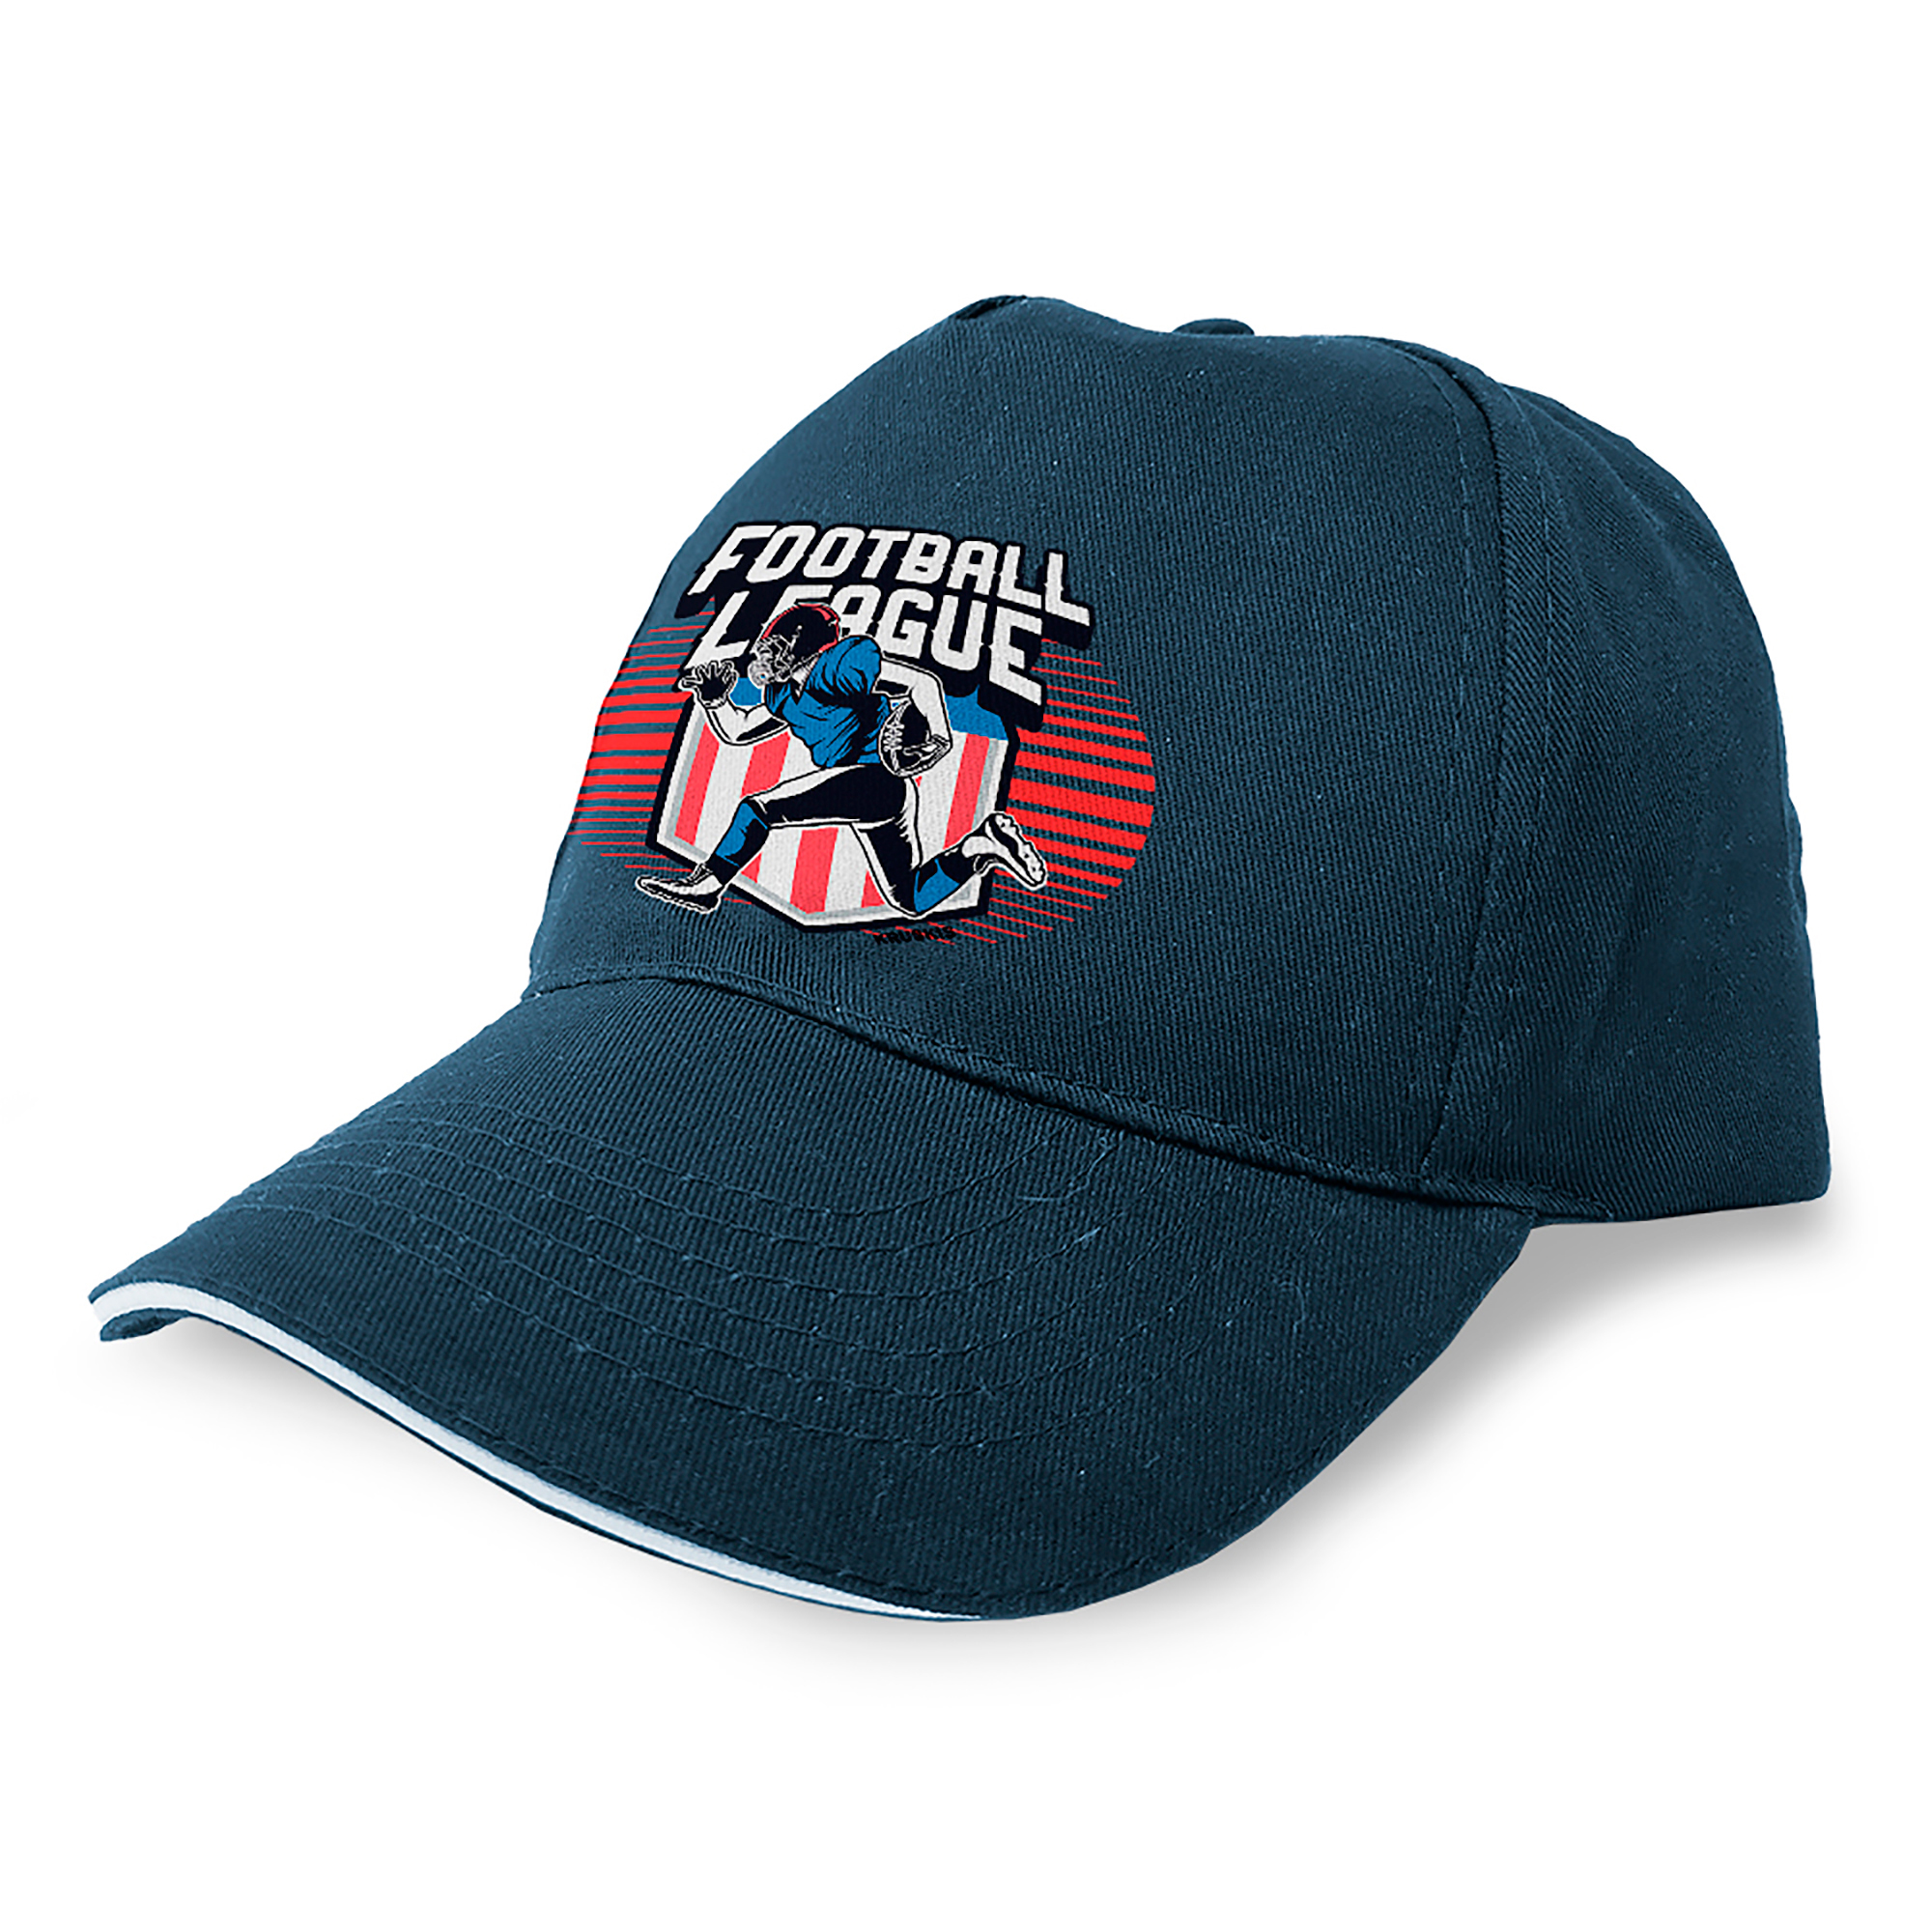 Casquette Rugby Football League Unisex